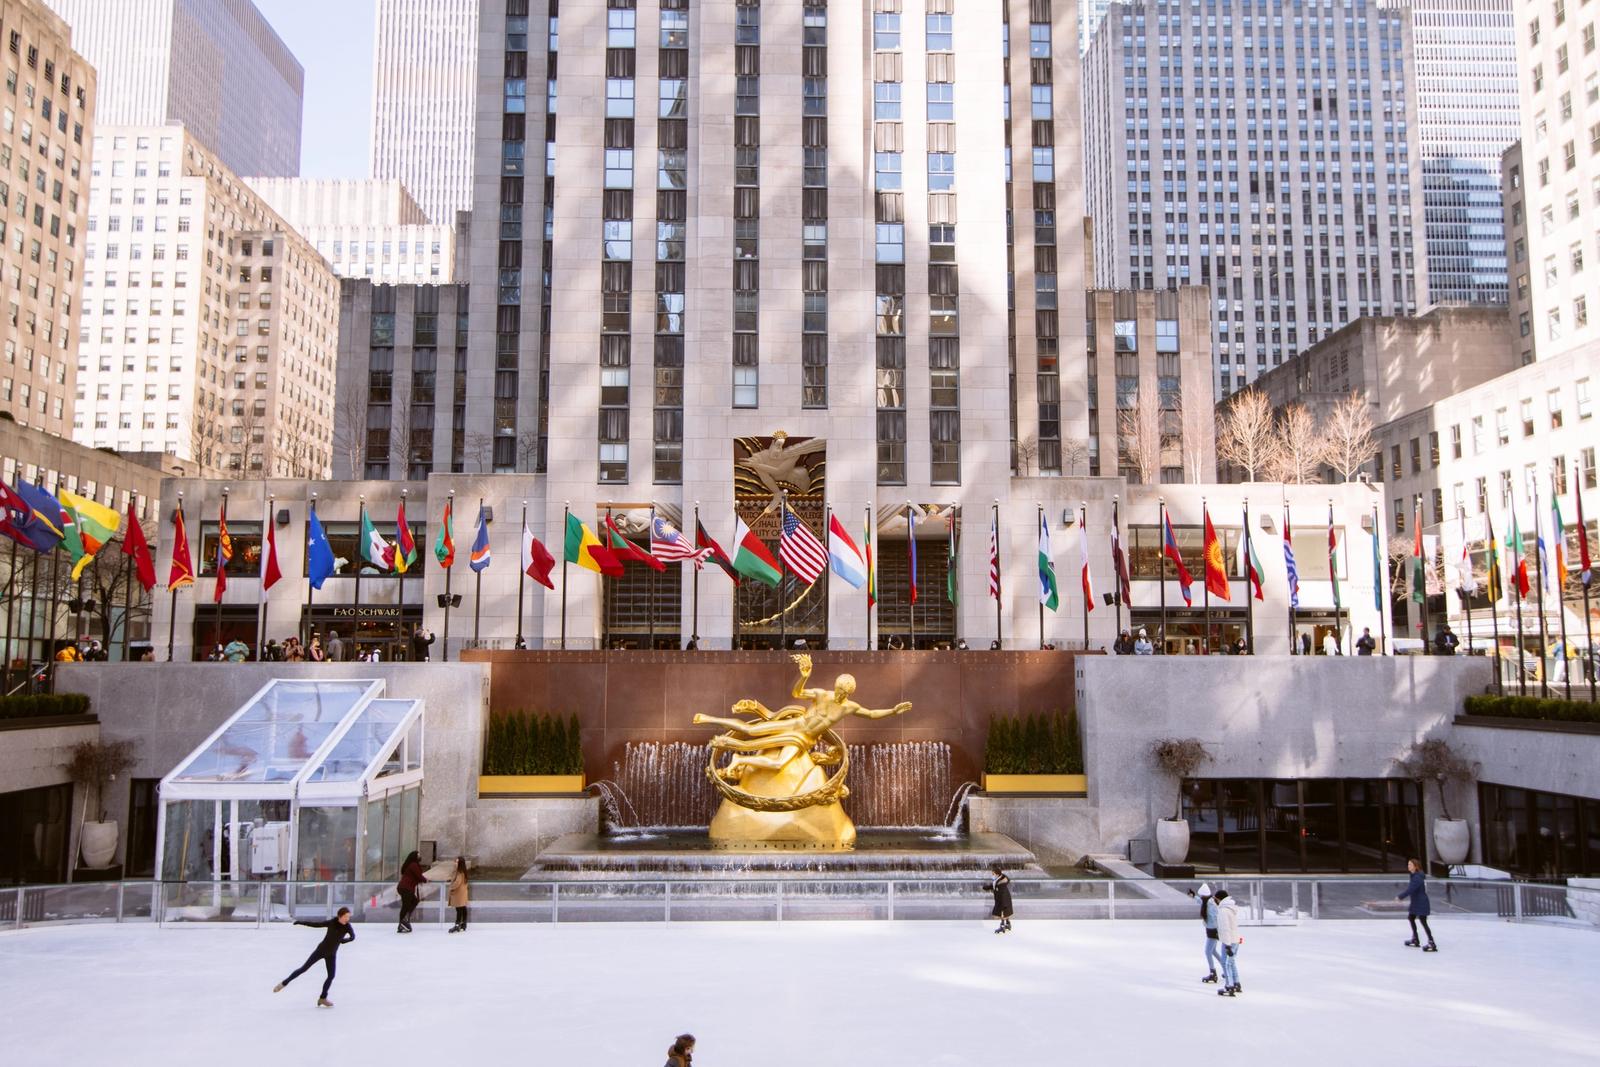 Get Your Skates on as The Rink at Rockefeller Center Returns This Saturday